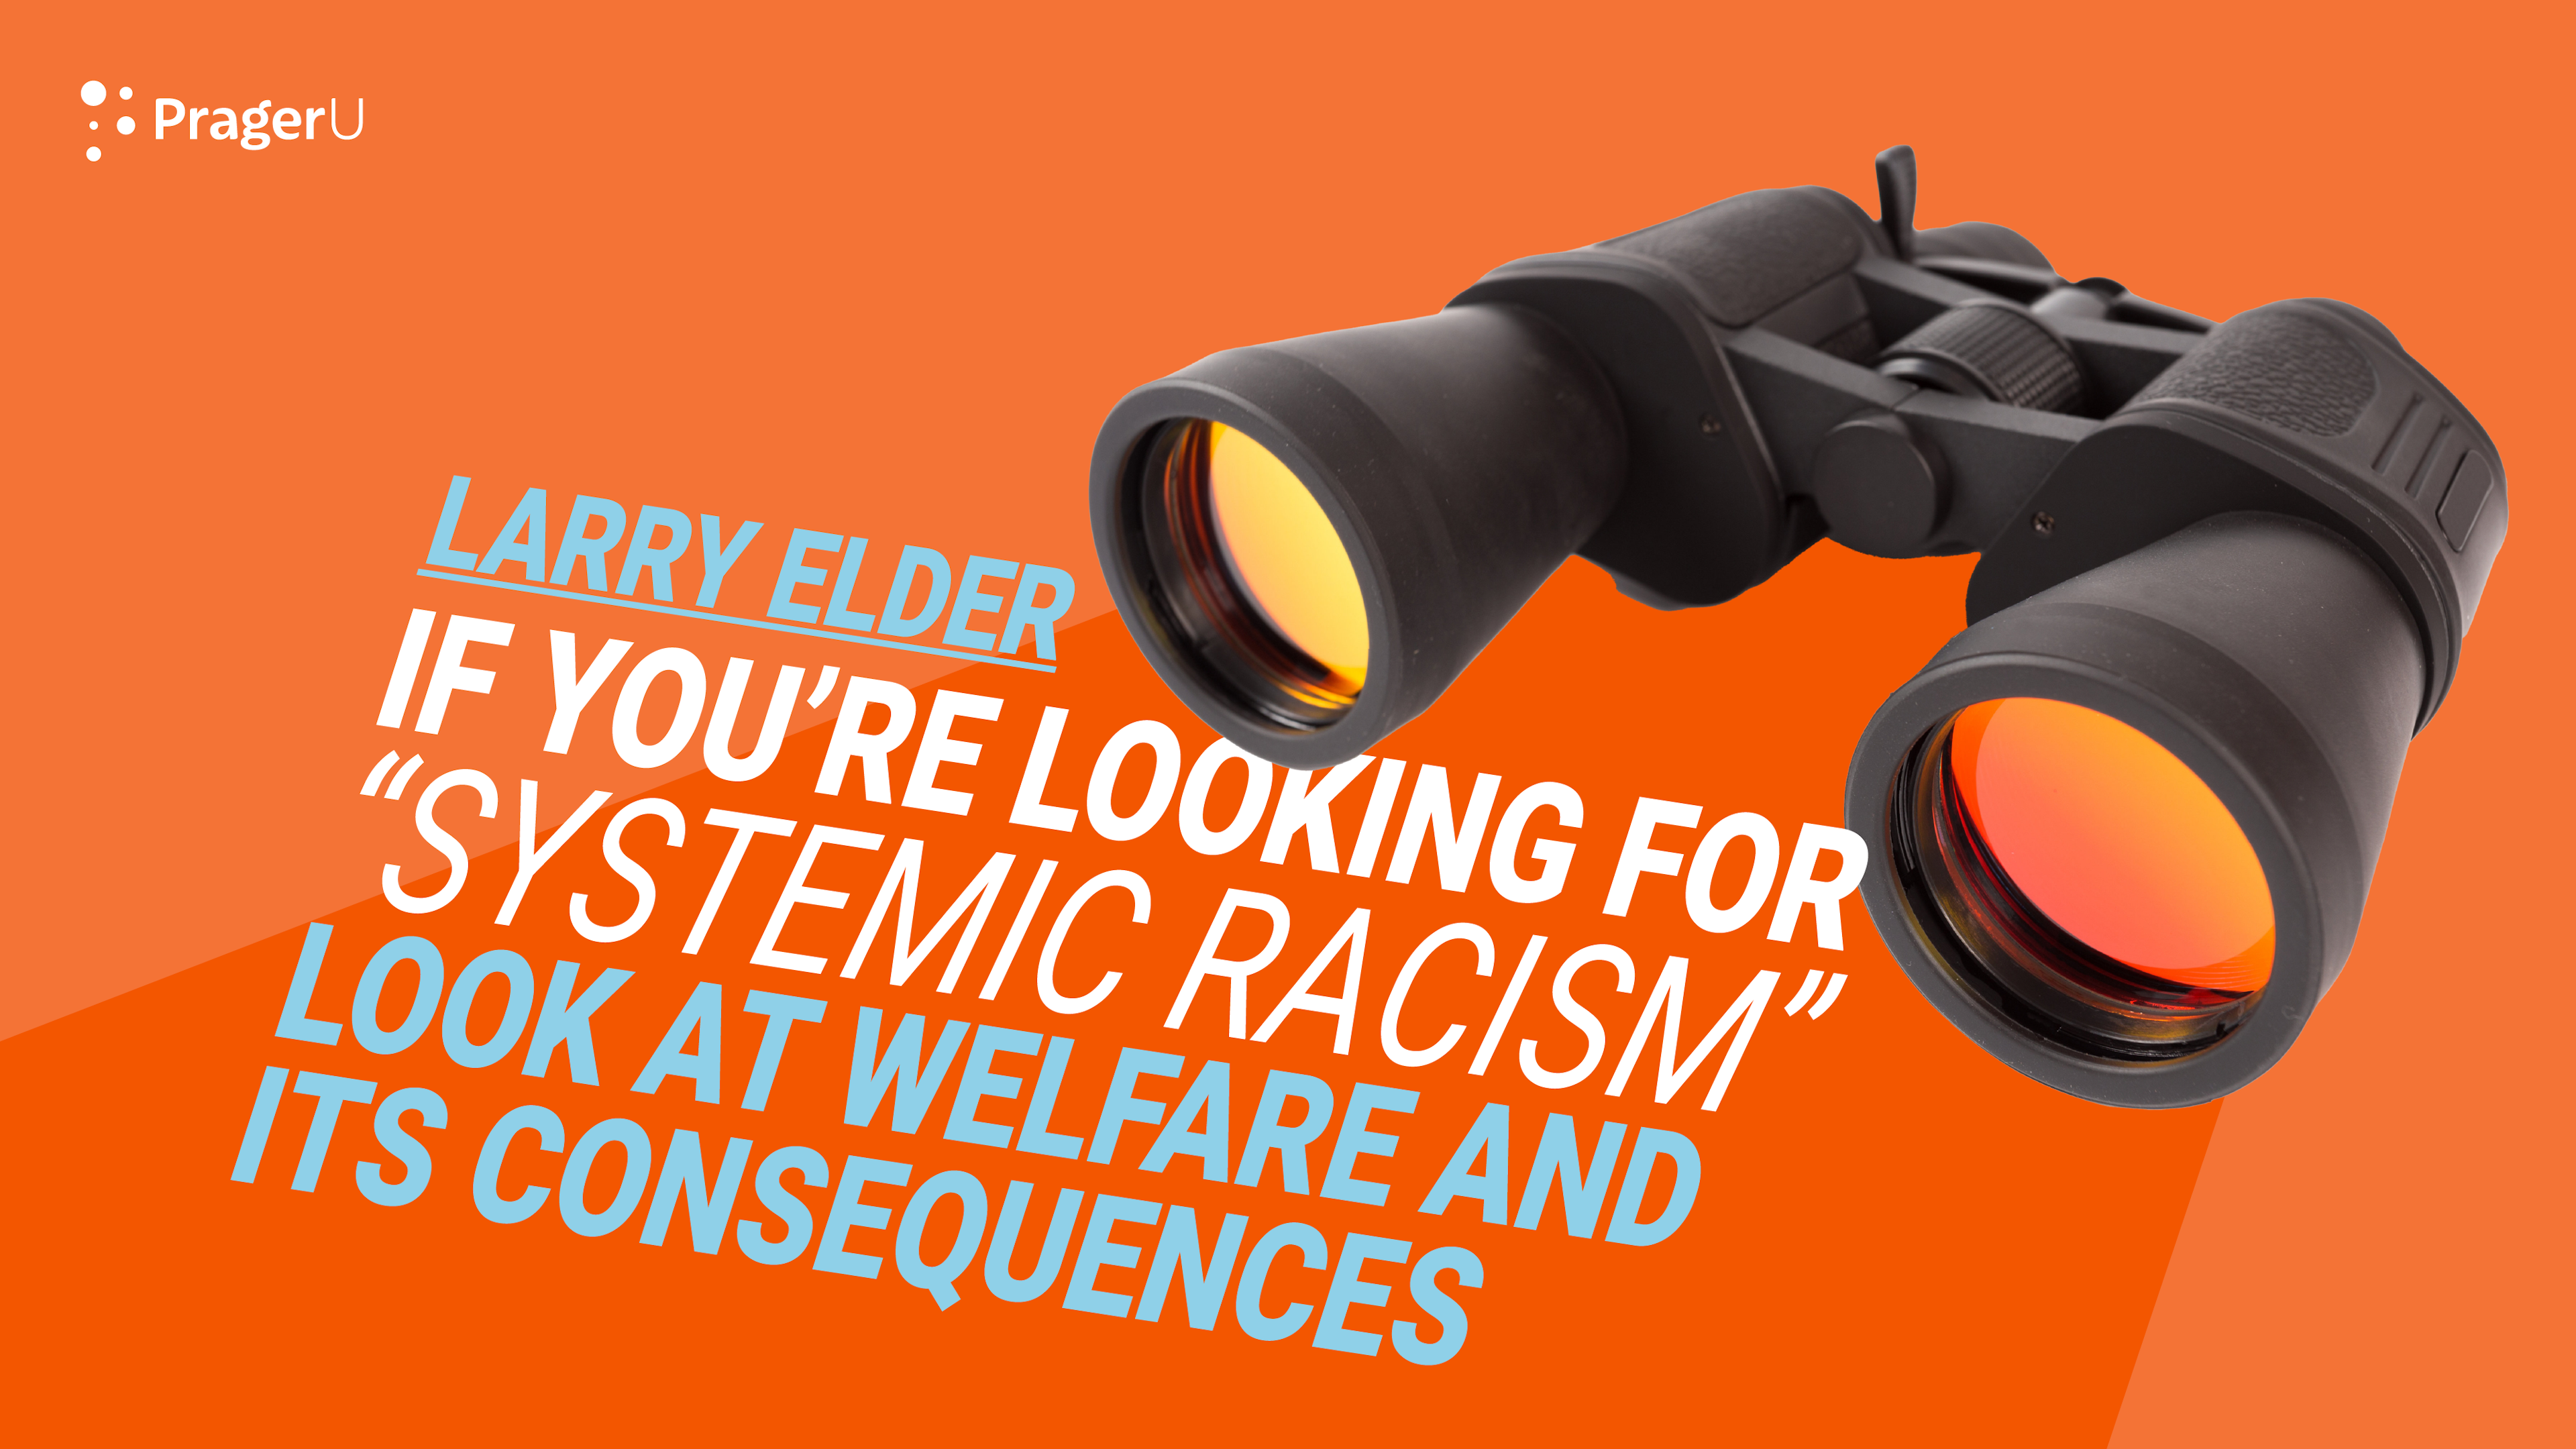 If You’re Looking for "Systemic Racism" Look at Welfare and Its Consequences